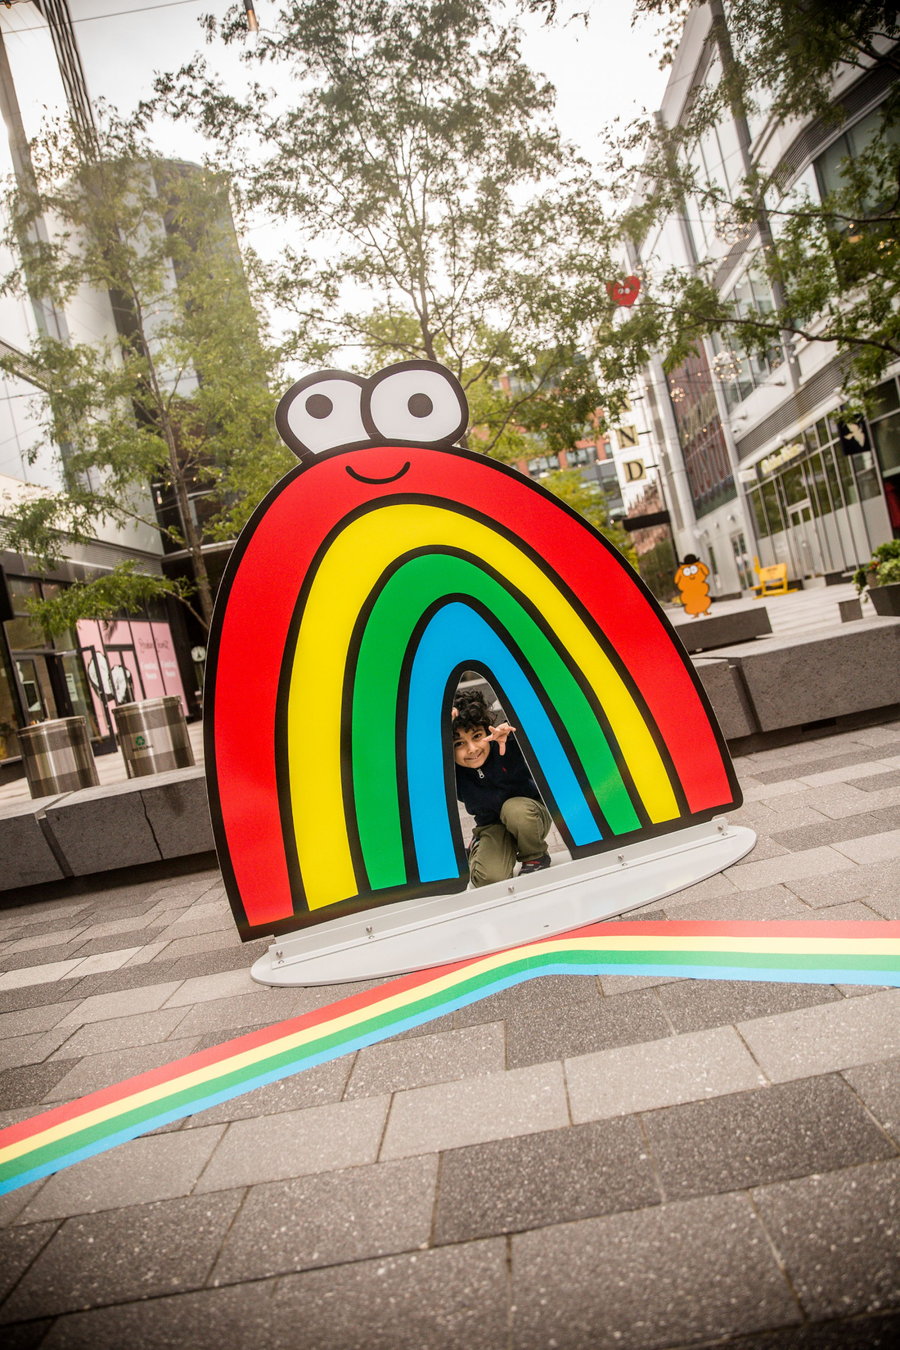 Warm-hearted doodles from artist Jon Burgerman are brought to life in the Boston Seaport's new 